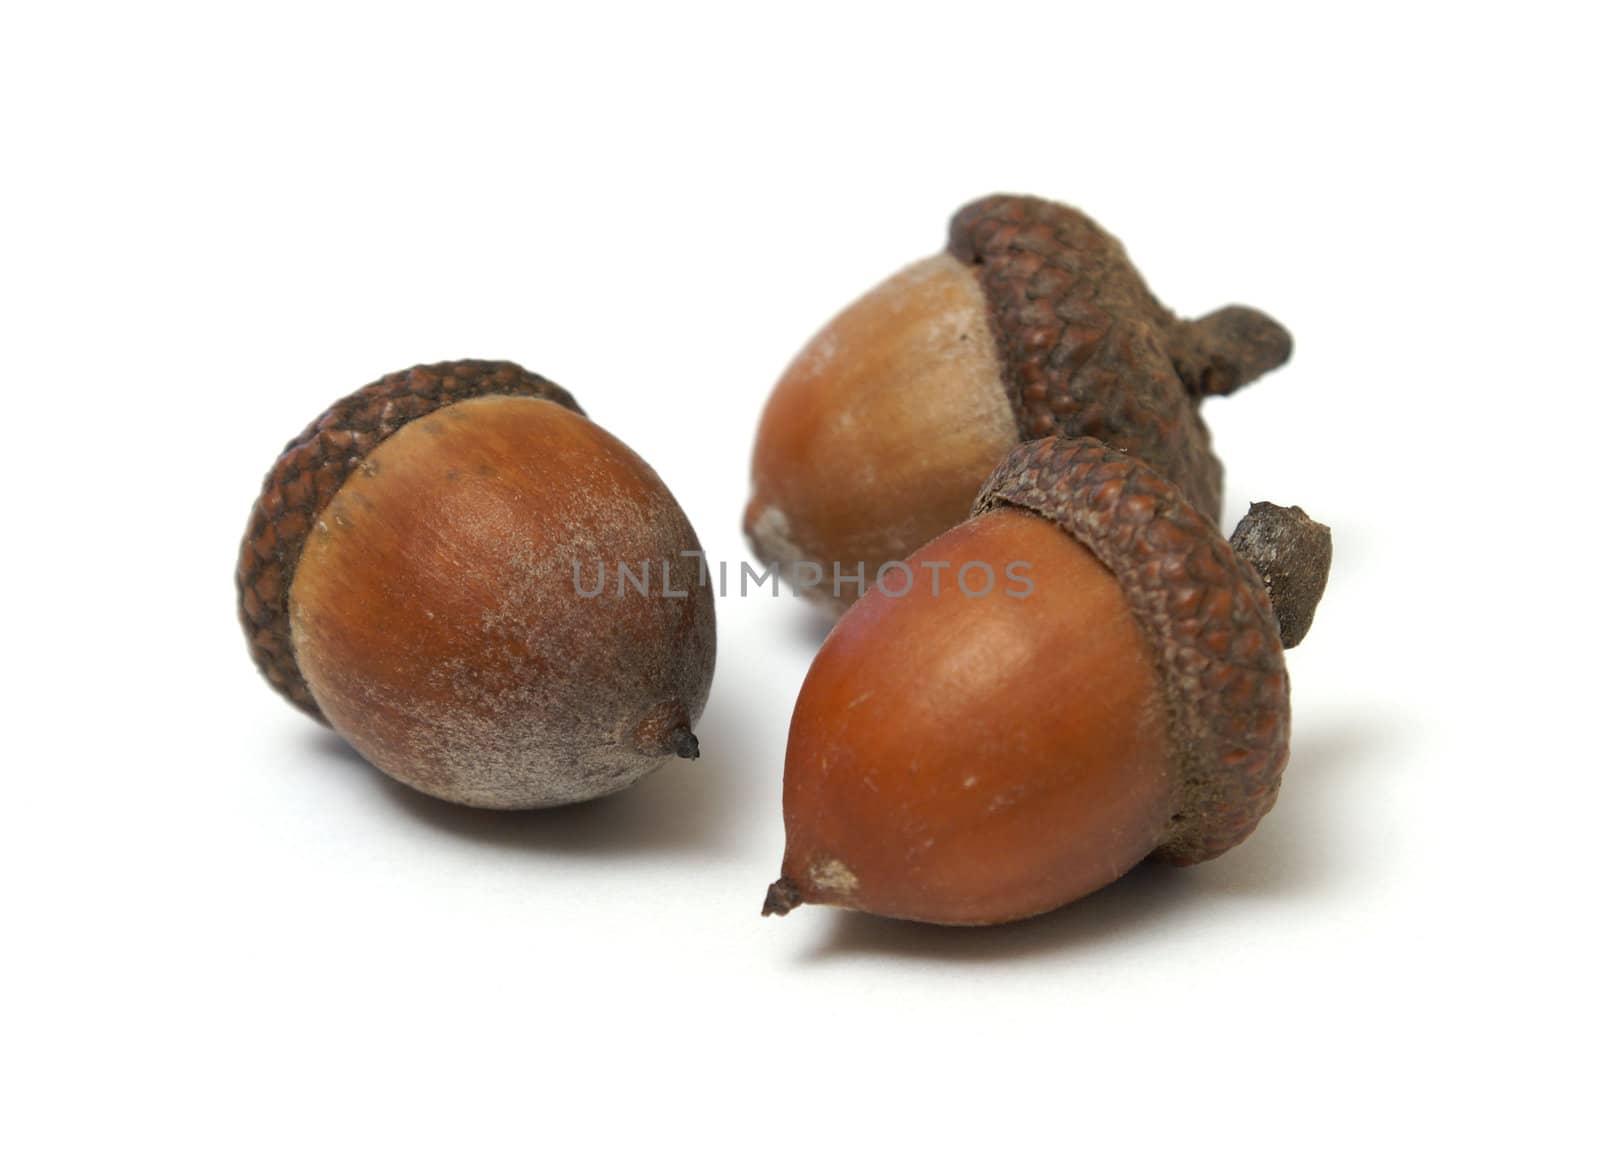 Three isolated acorns on a white background.